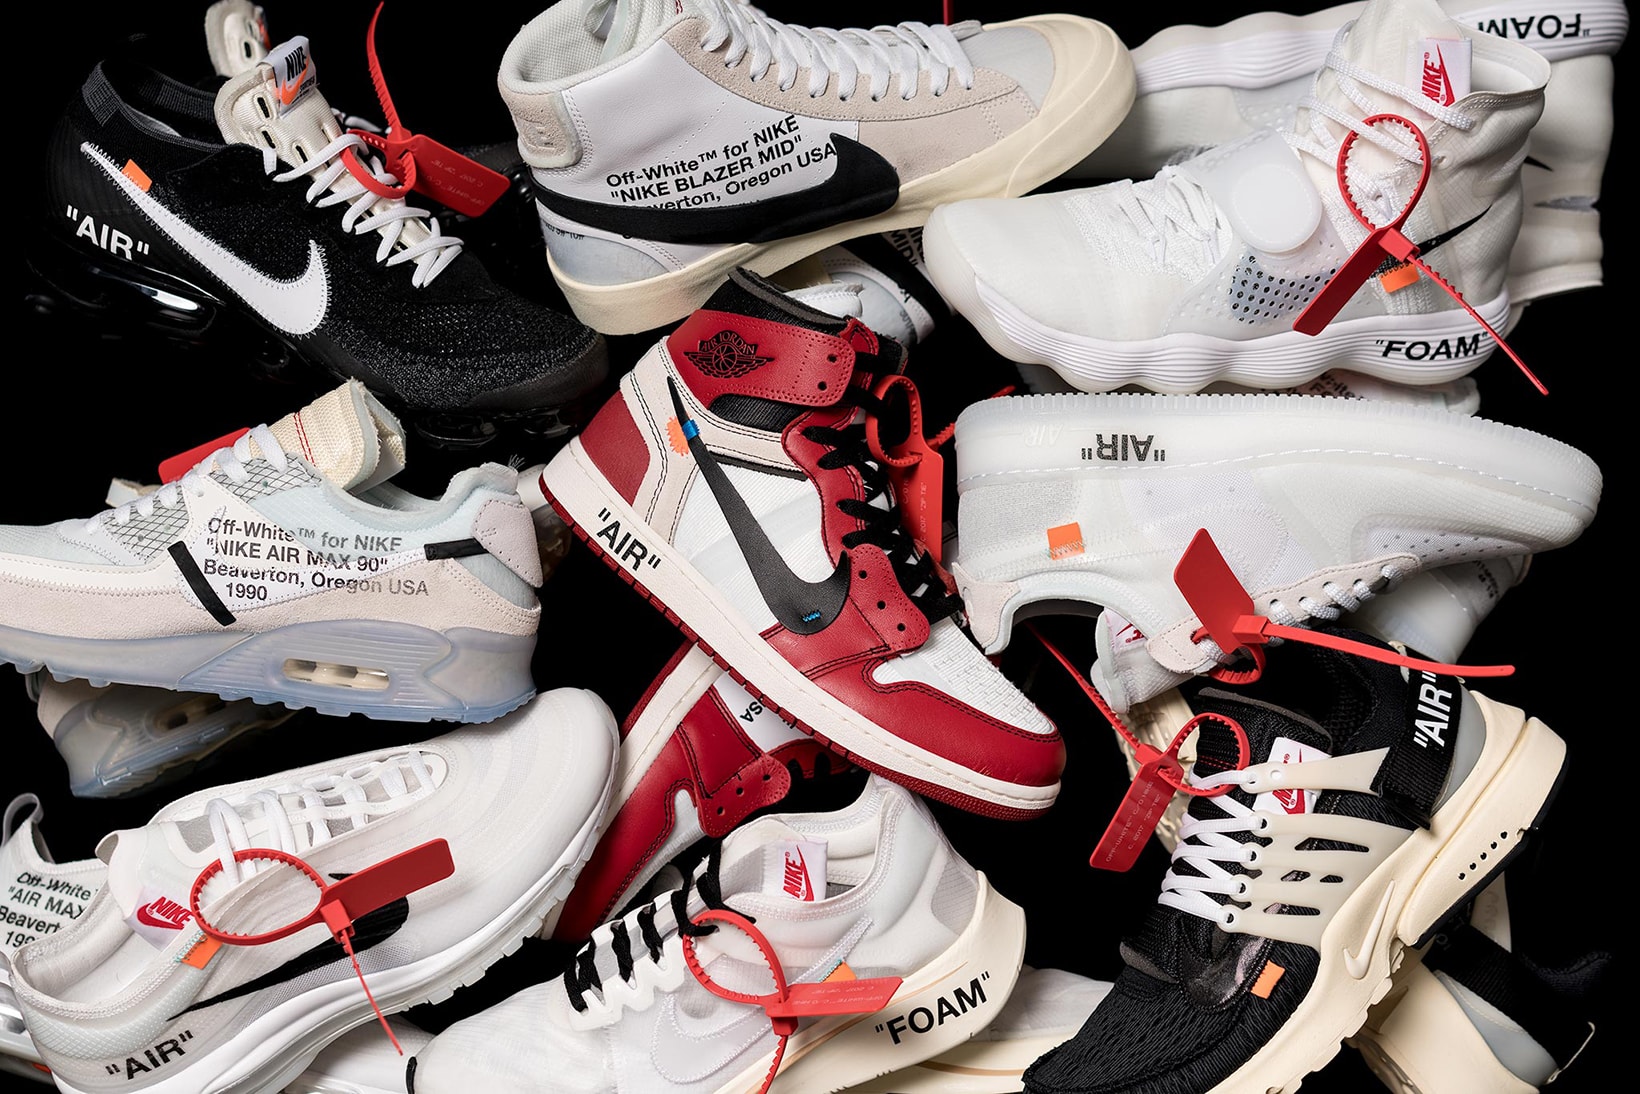 How To Get Your Hands On A Pair Of Virgil Abloh-Designed Nike Air